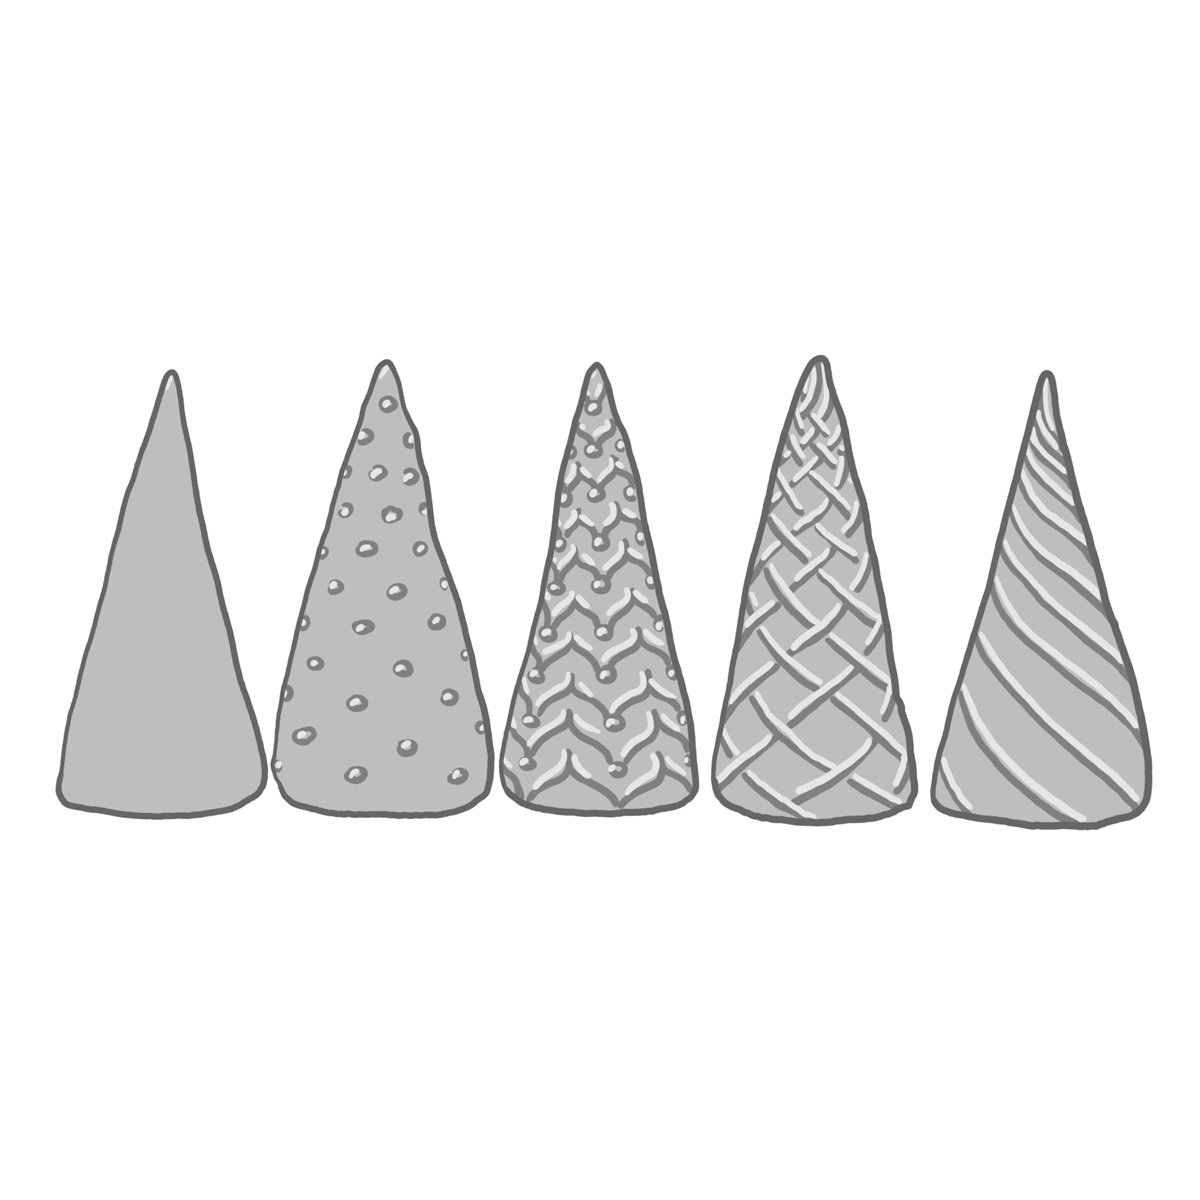 Candy-Cones---Schematic-sketches-(Square).jpg